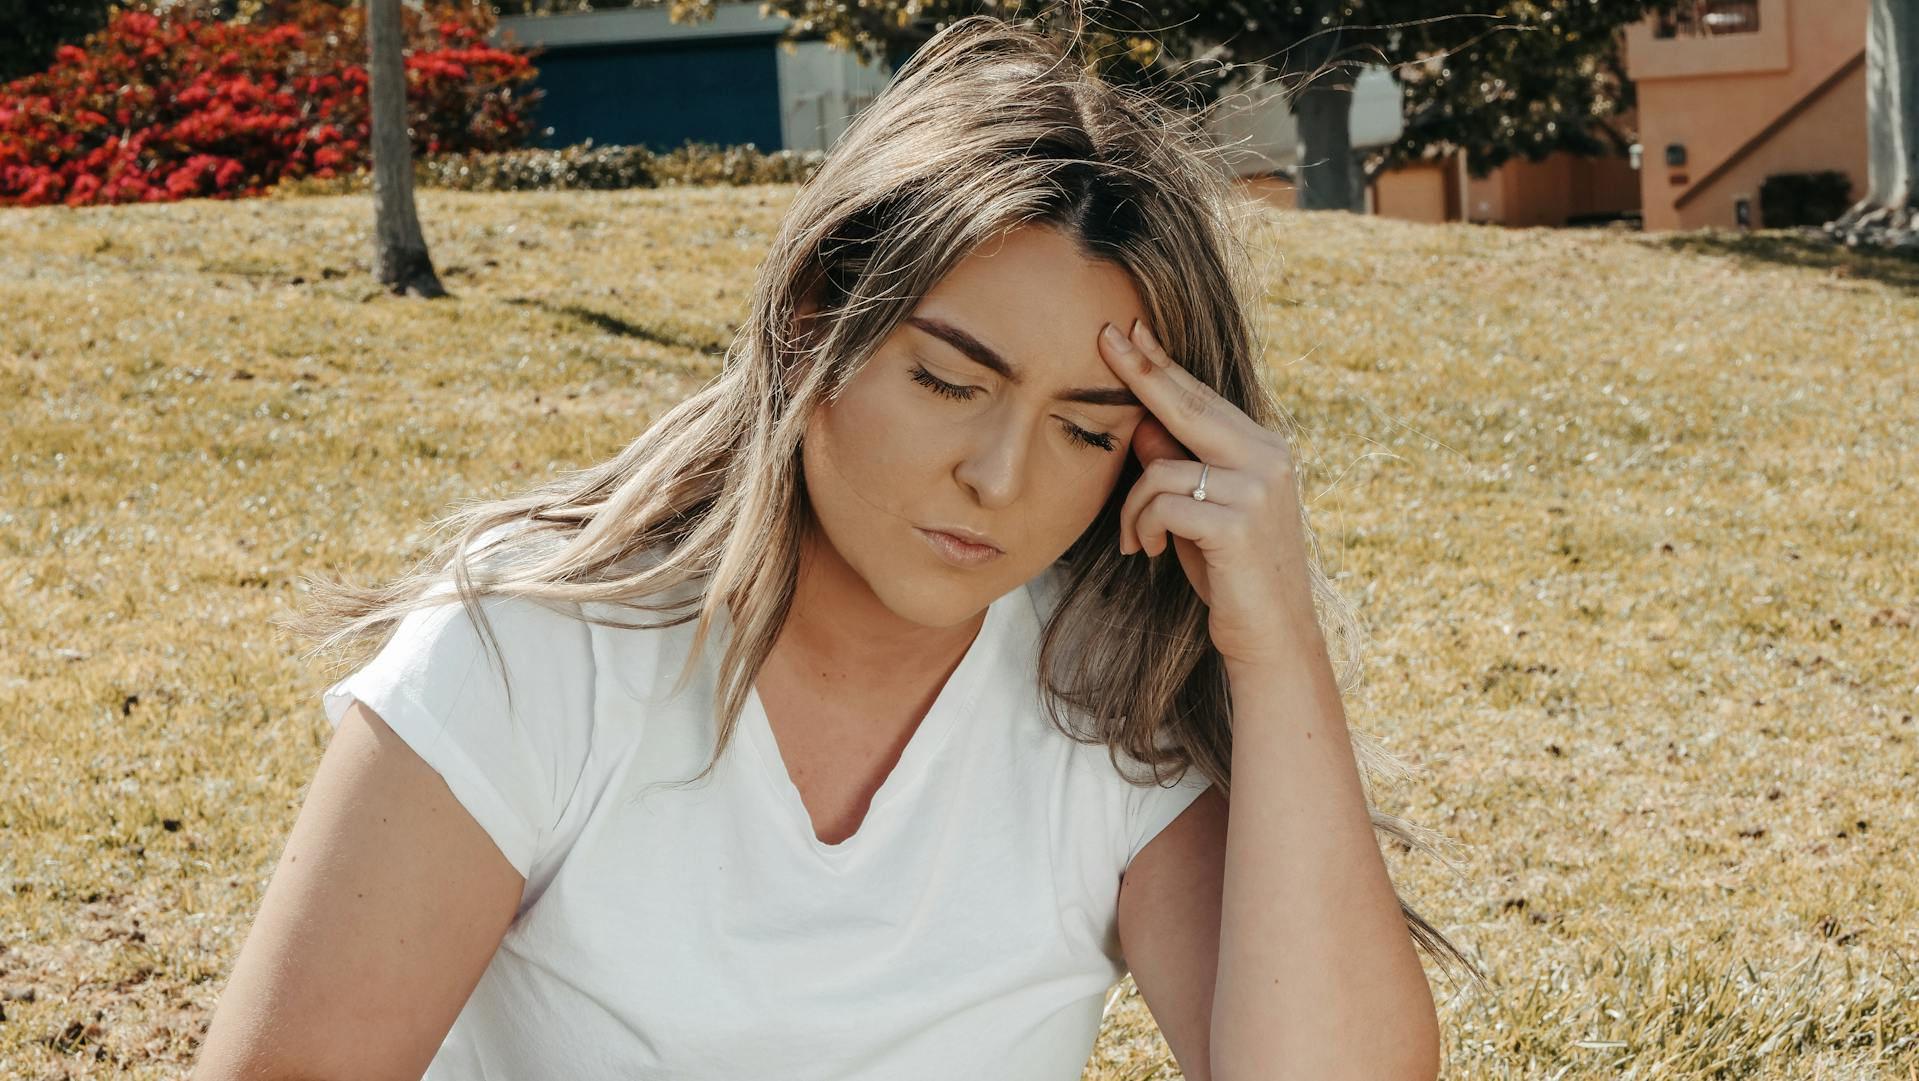 A stressed woman holding her head | Source: Pexels